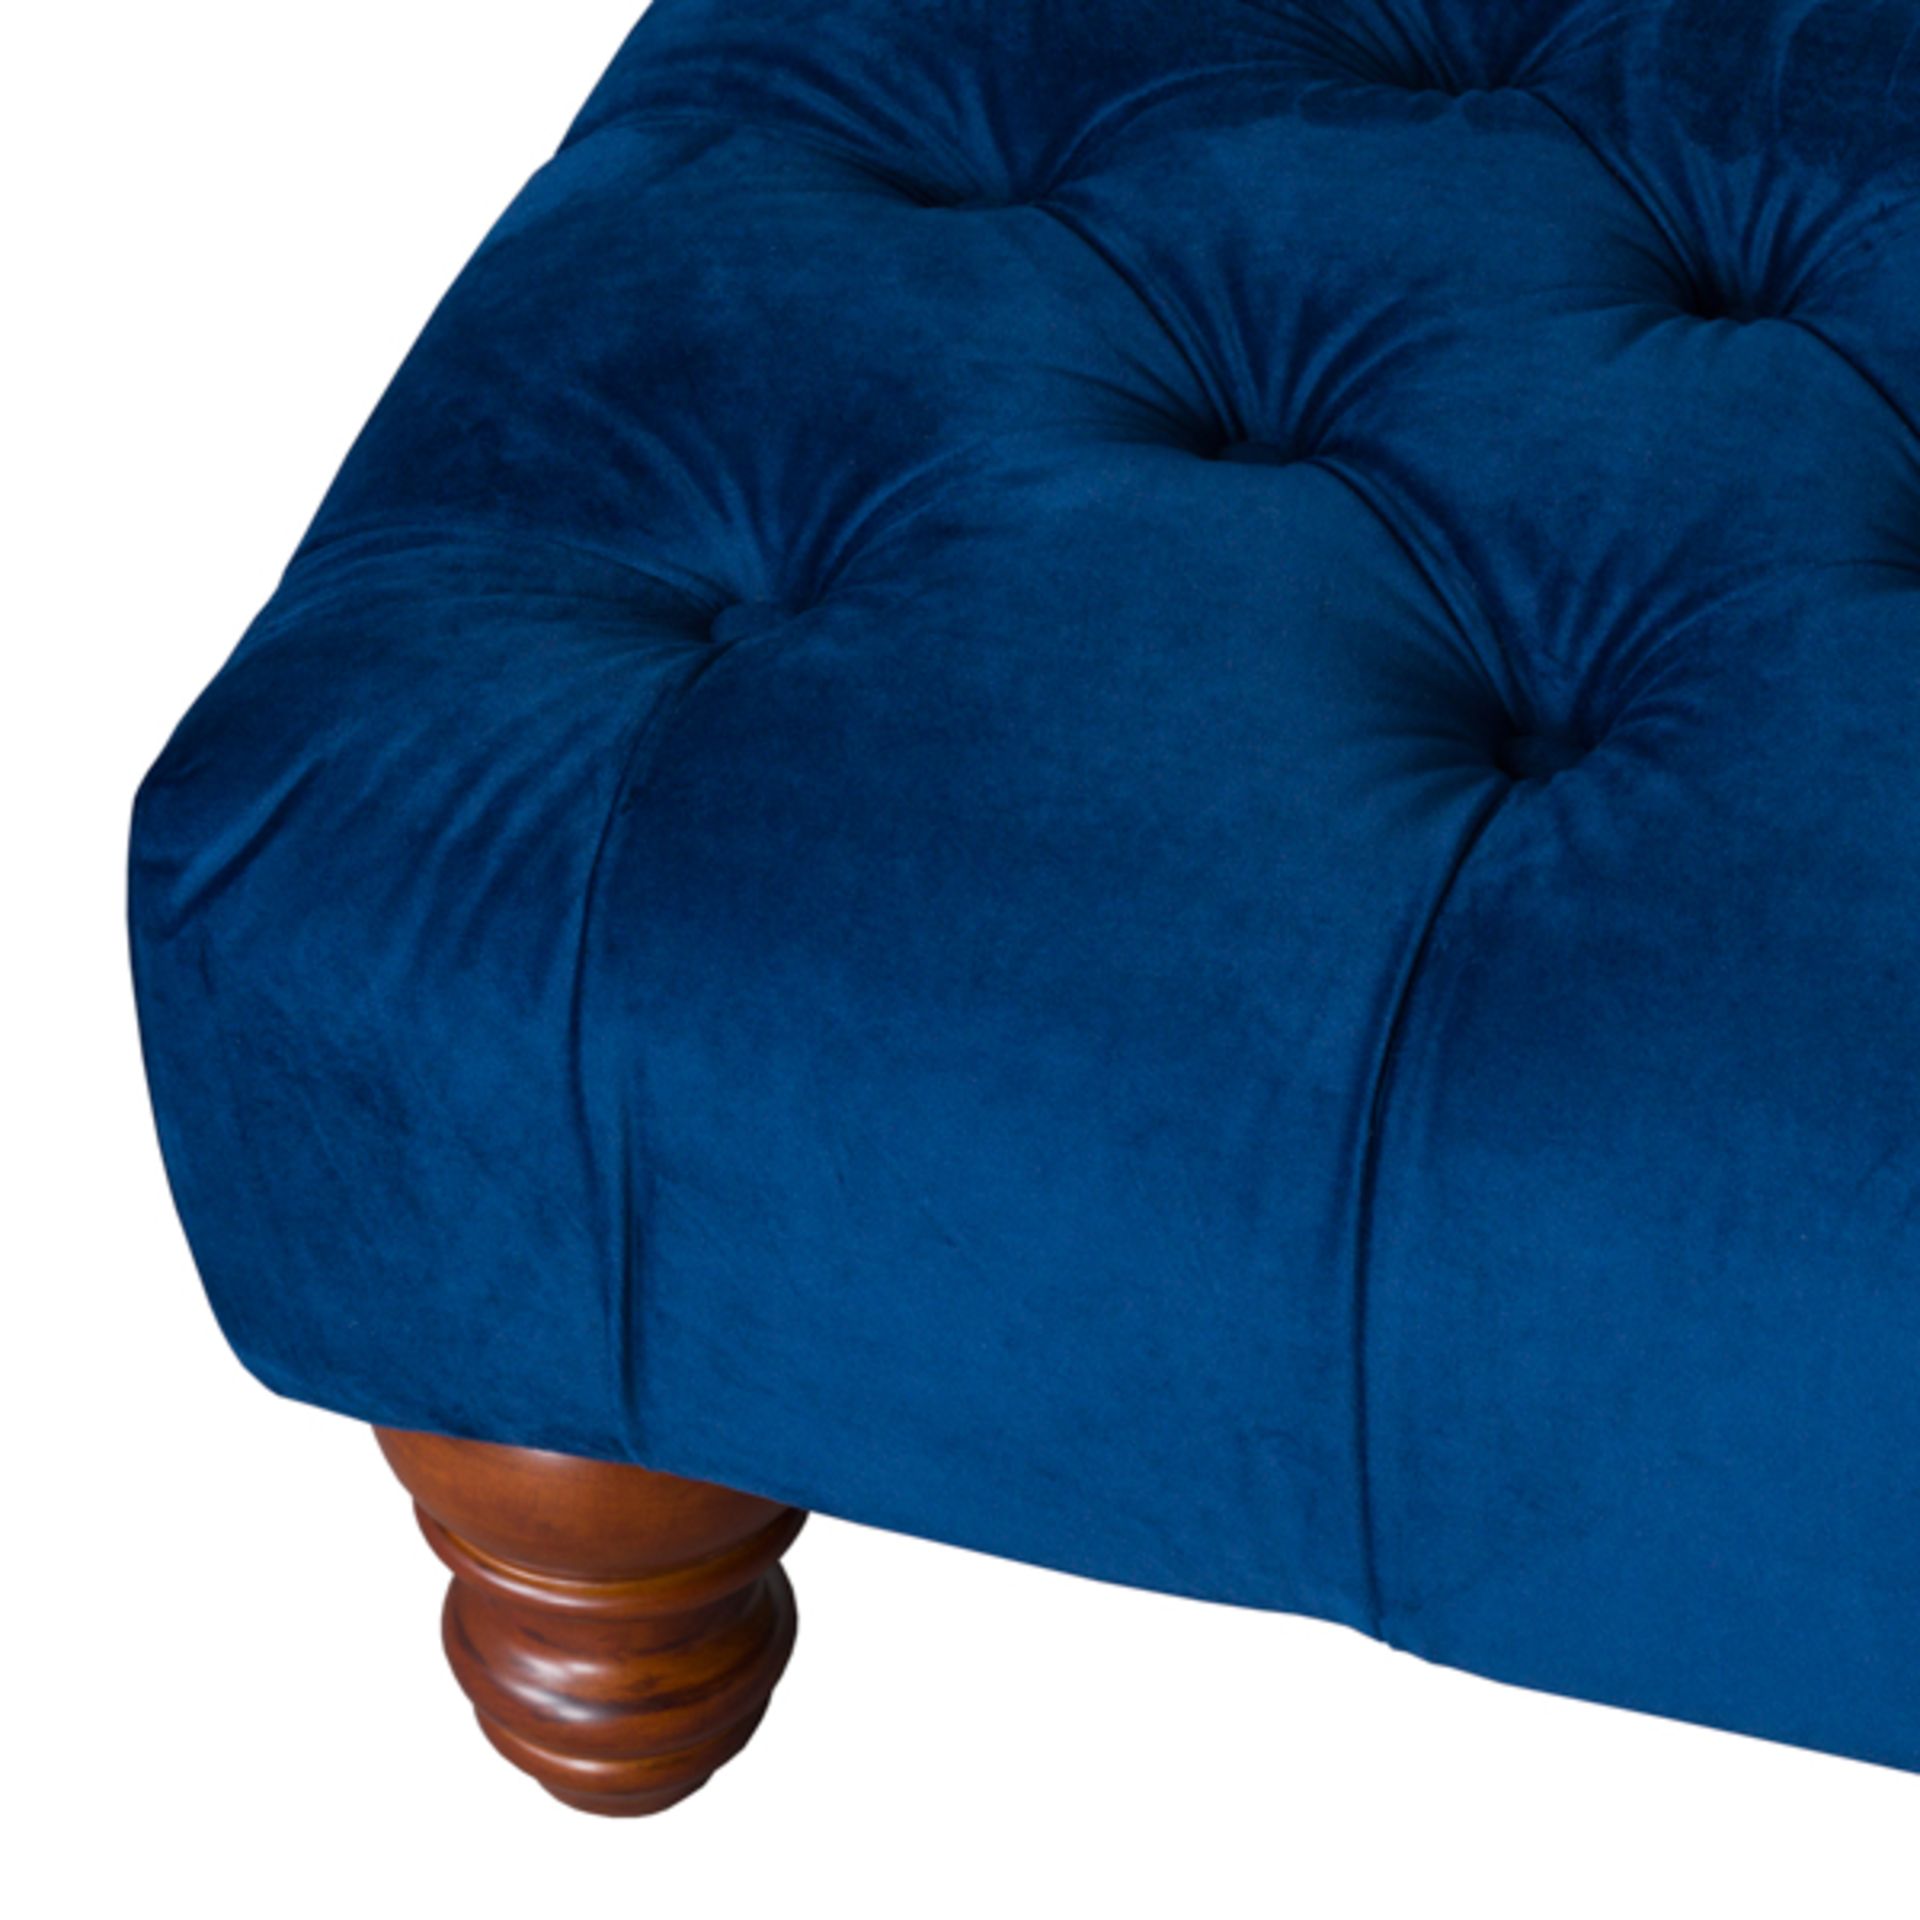 Benedict Tufted Rectangle Ottoman Grace your home interior with the timeless beauty of the - Image 2 of 2